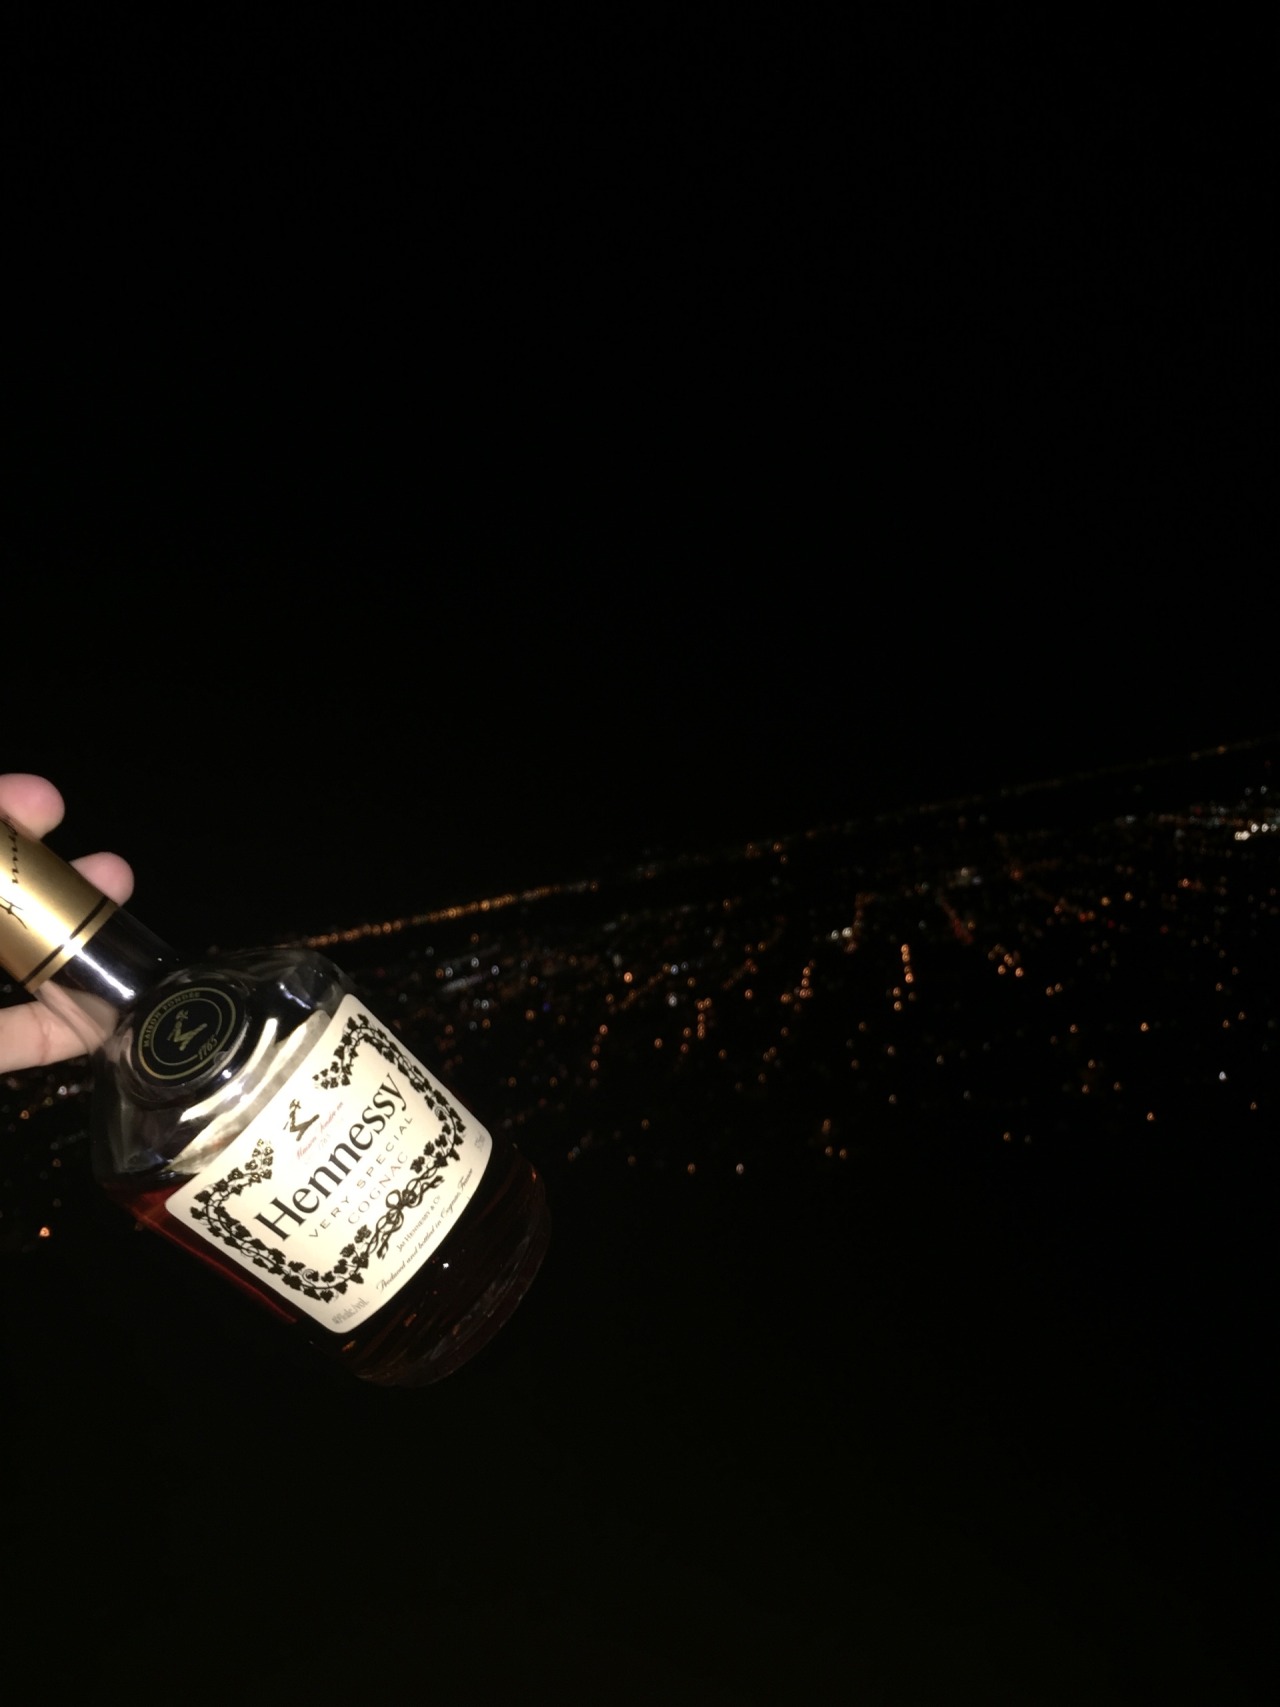 Tumblr pictures hennessy 41 Hottest